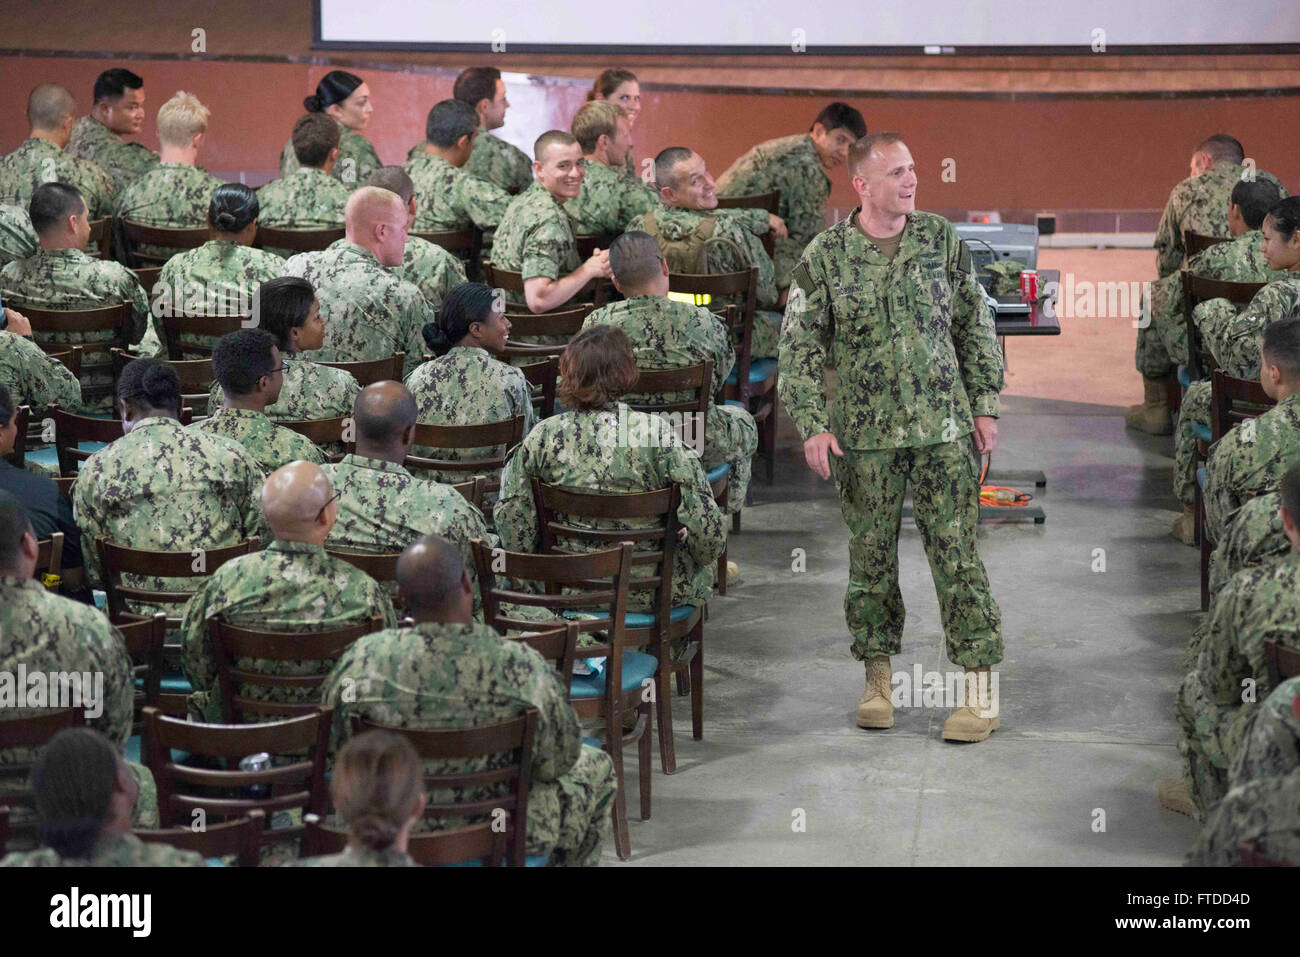 150603-N-OX801-371 CAMP LEMONNIER, Djibouti (June 3, 2015) Naval Forces Europe-Africa Fleet Master Chief Steven Giordano speaks to Sailors at an all-hands call during his visit to Camp Lemonnier in Djibouti, Africa, June 3, 2015. Giordano's visit to Camp Lemonnier and Combined Joint Task Force-Horn of Africa locations served to better understand the commands' quality of work and quality of life, as well as recognizing exemplary Sailors within each command. (U.S. Navy photo by Mass Communication Specialist 2nd Class Daniel P. Schumacher/Released) Stock Photo